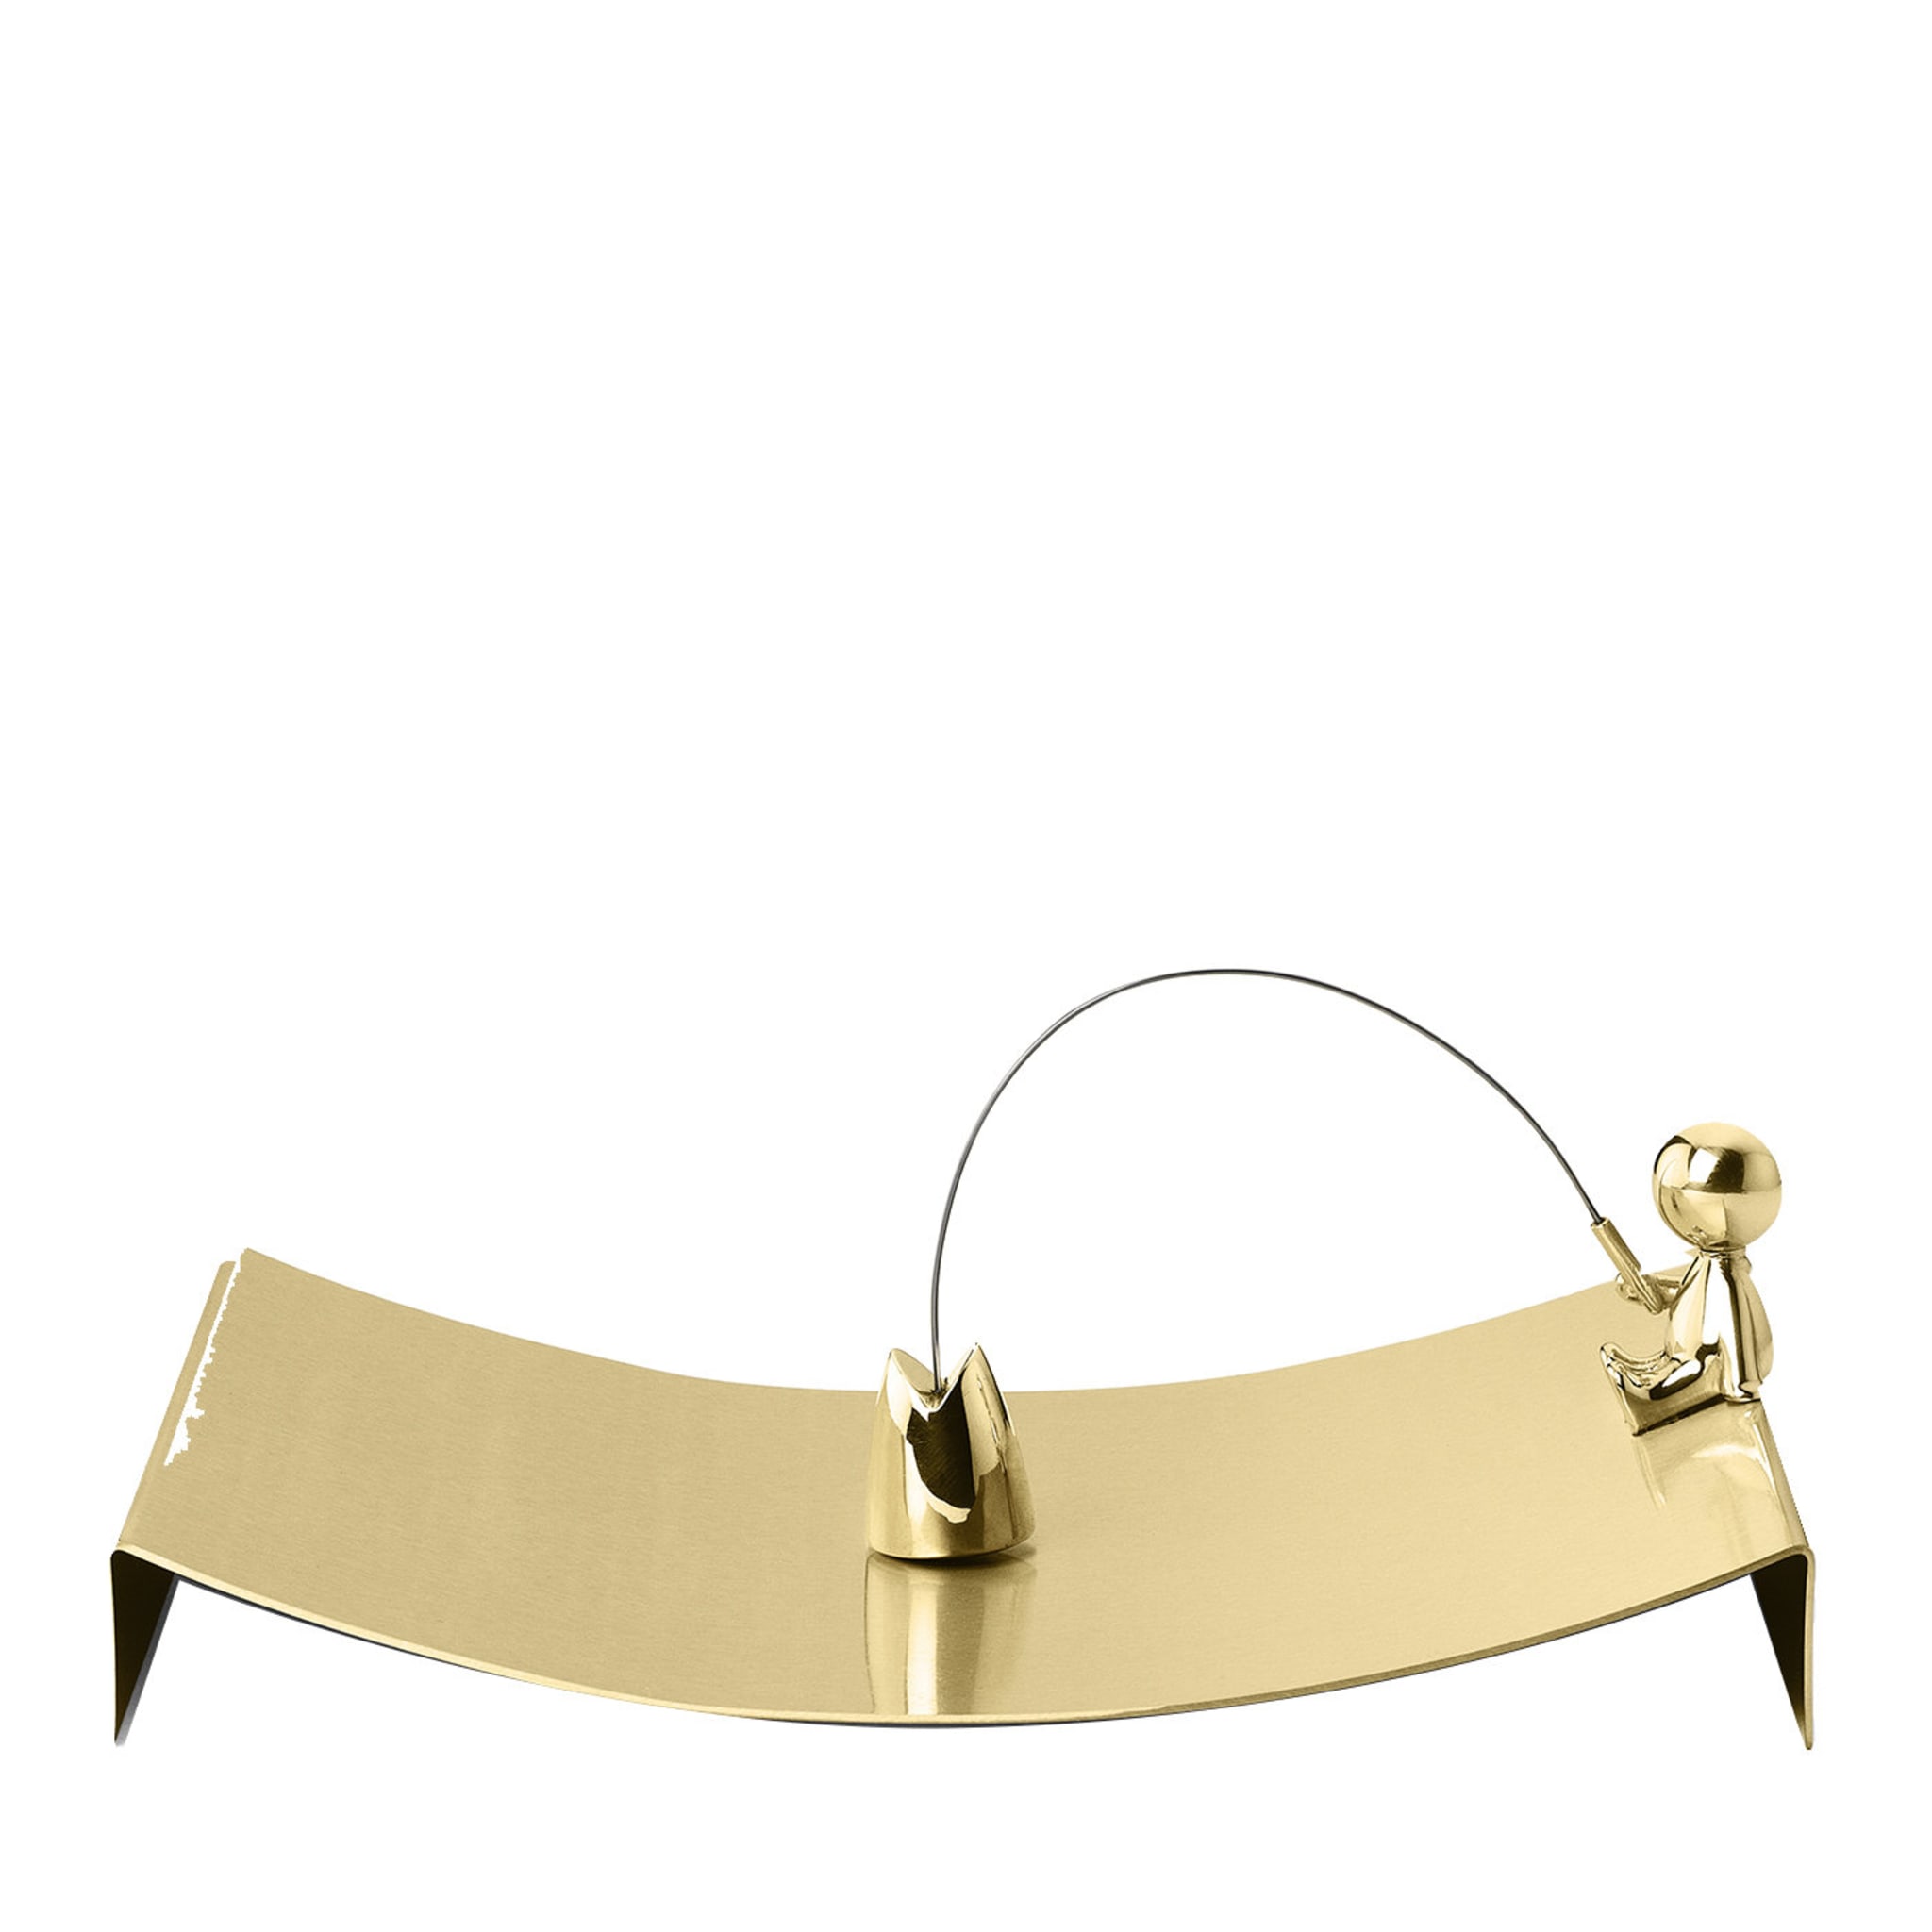 Omini Fisherman Napkin Tray in Polished Brass By Stefano Giovannoni - Main view